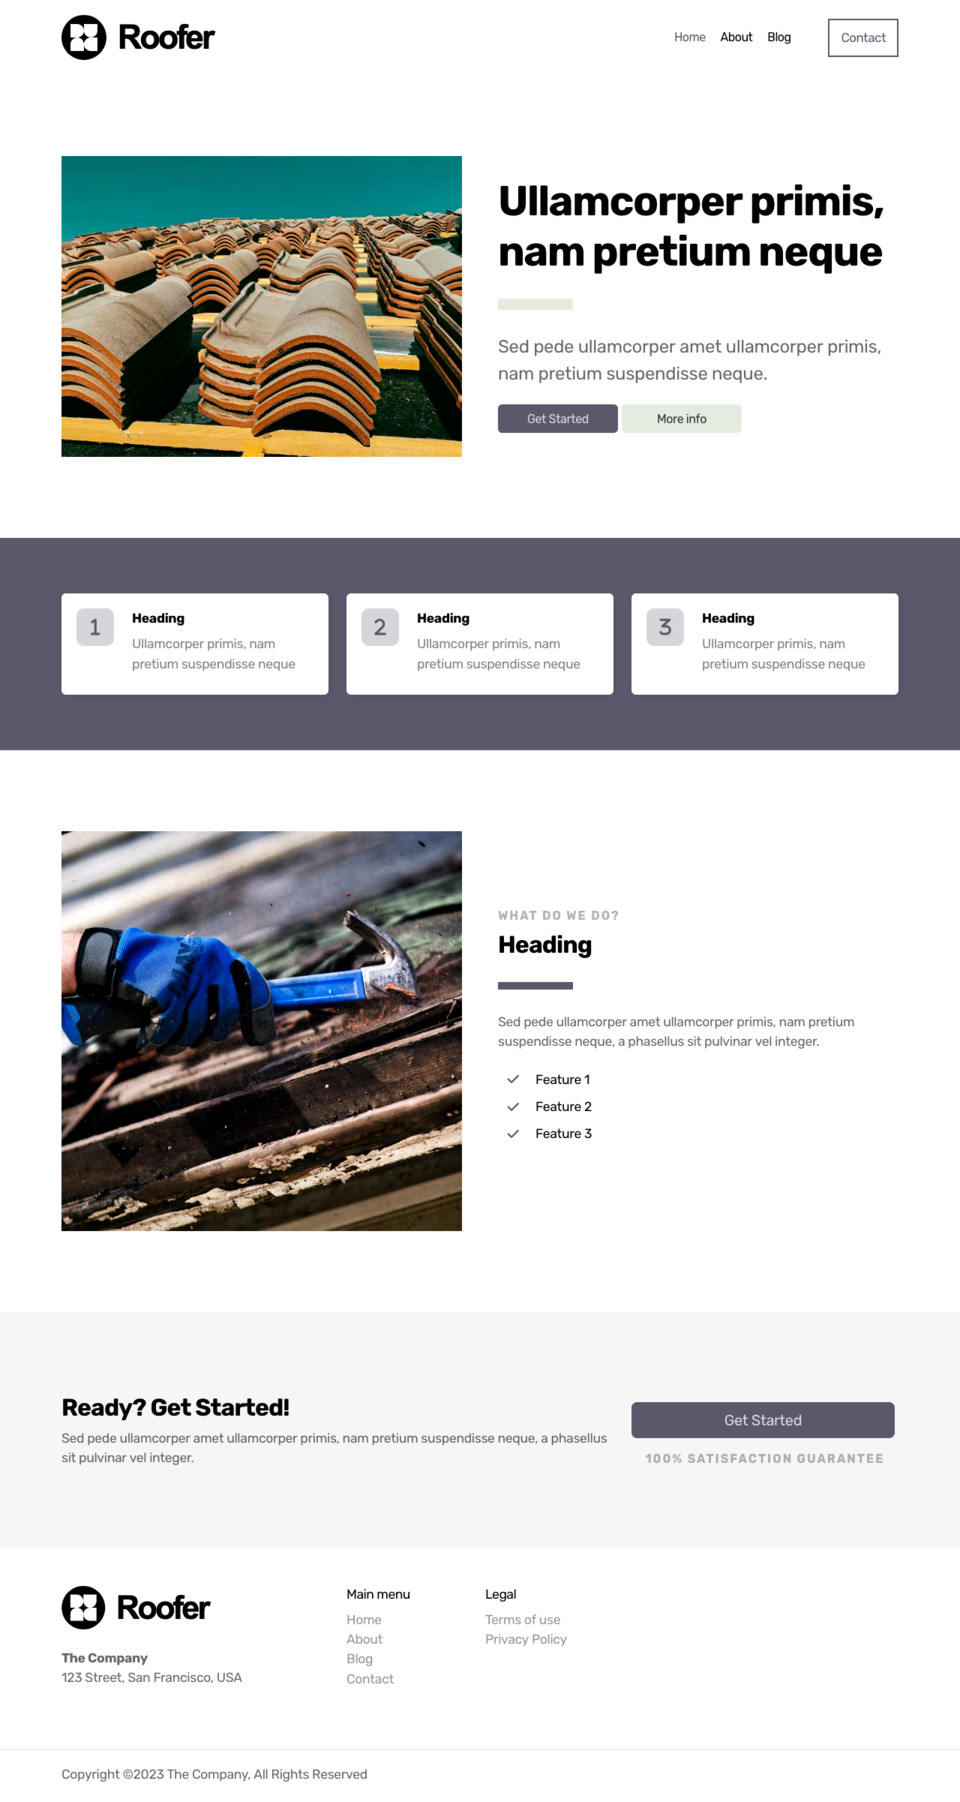 Roofer Website Template - Ideal for small business owners in the roofing, house construction, and architecture industries